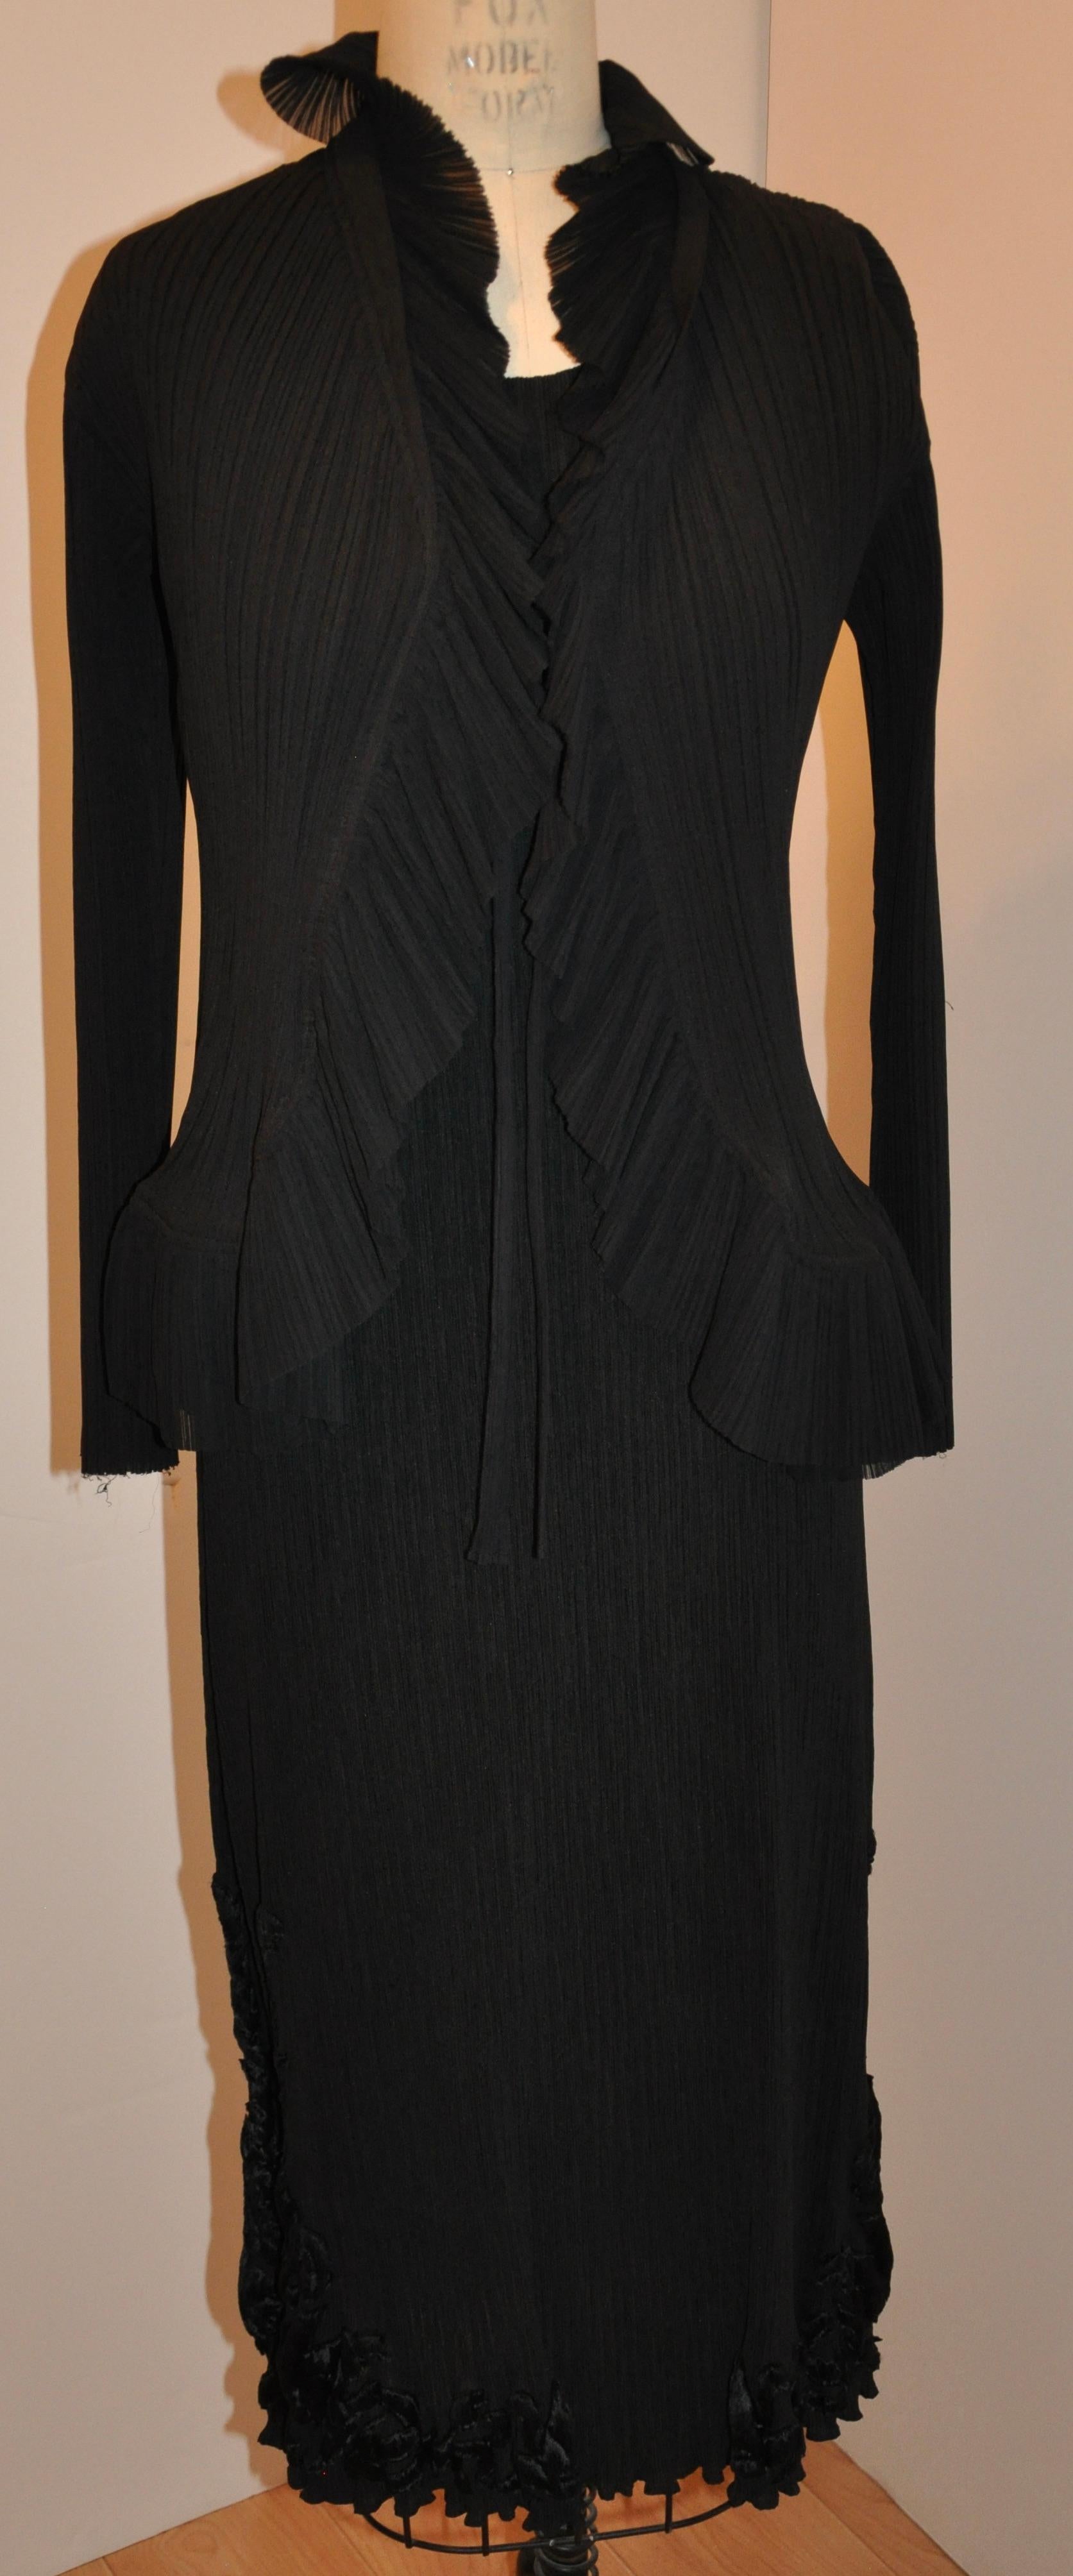    This wonderfully rare Issey Miyake/Bergdorf Goodman jet-black accented with floral velvet dress is matched with an optional open-faced ruffled open jacket. The scoop neckline dress, slightly flared, is embellished with detailed floral patterned